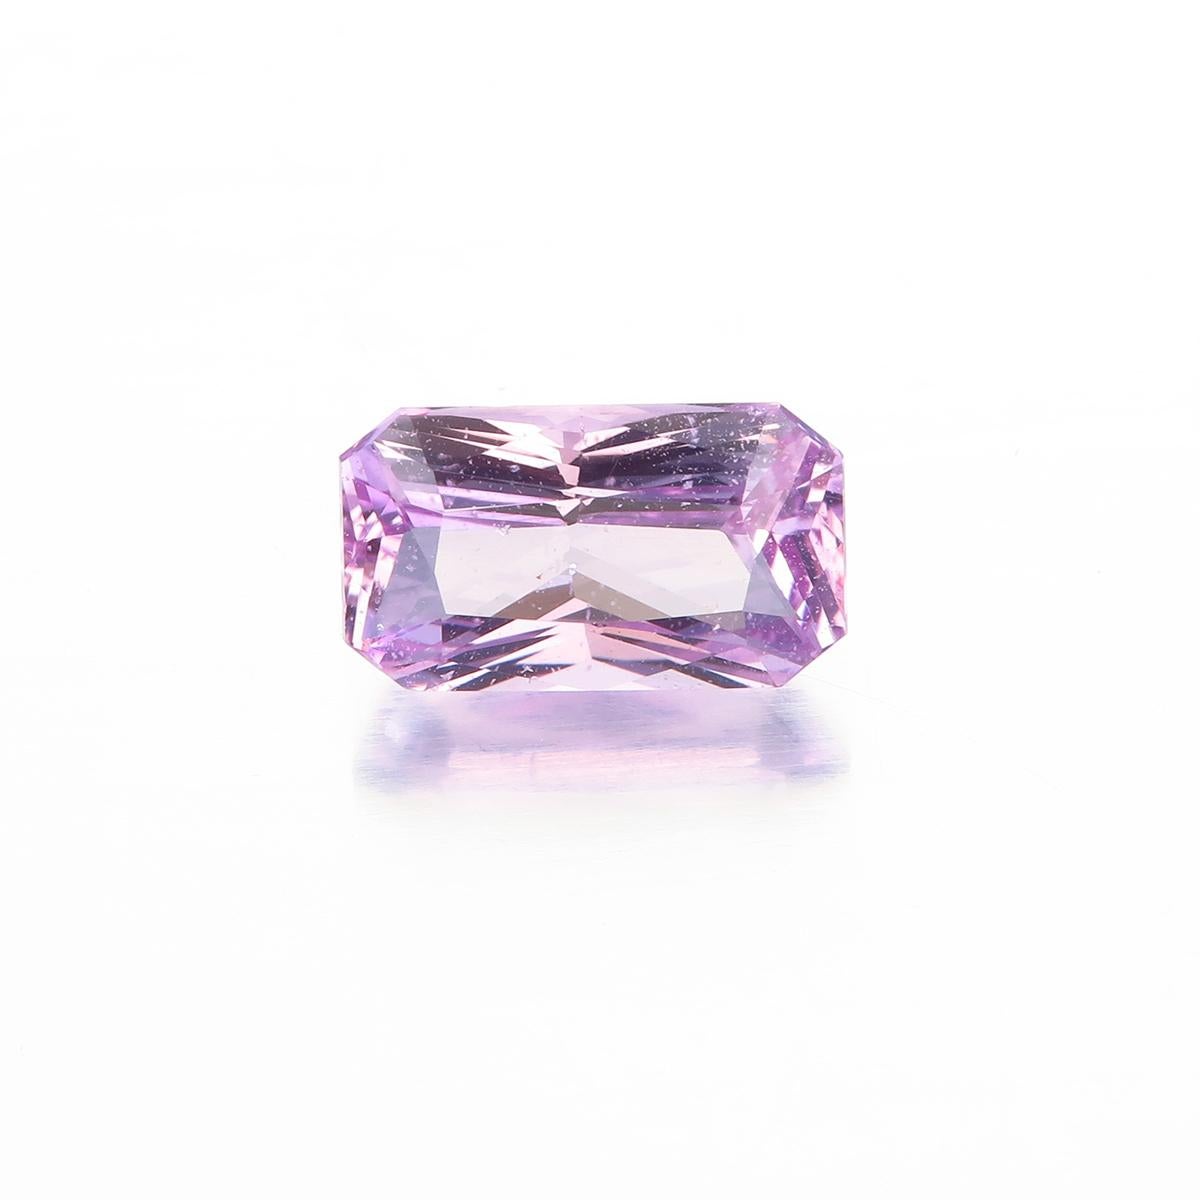 1.03 carat Pink Sapphire from Madagascar
Dimensions: 7.60 x 4.41 x 3.12 mm
Shape: Octagonal faceted brilliant cut
Color: Pink rich saturation with a medium light tone
Origin: Madagascar
Lotus report no: 6932-4243
No Heat